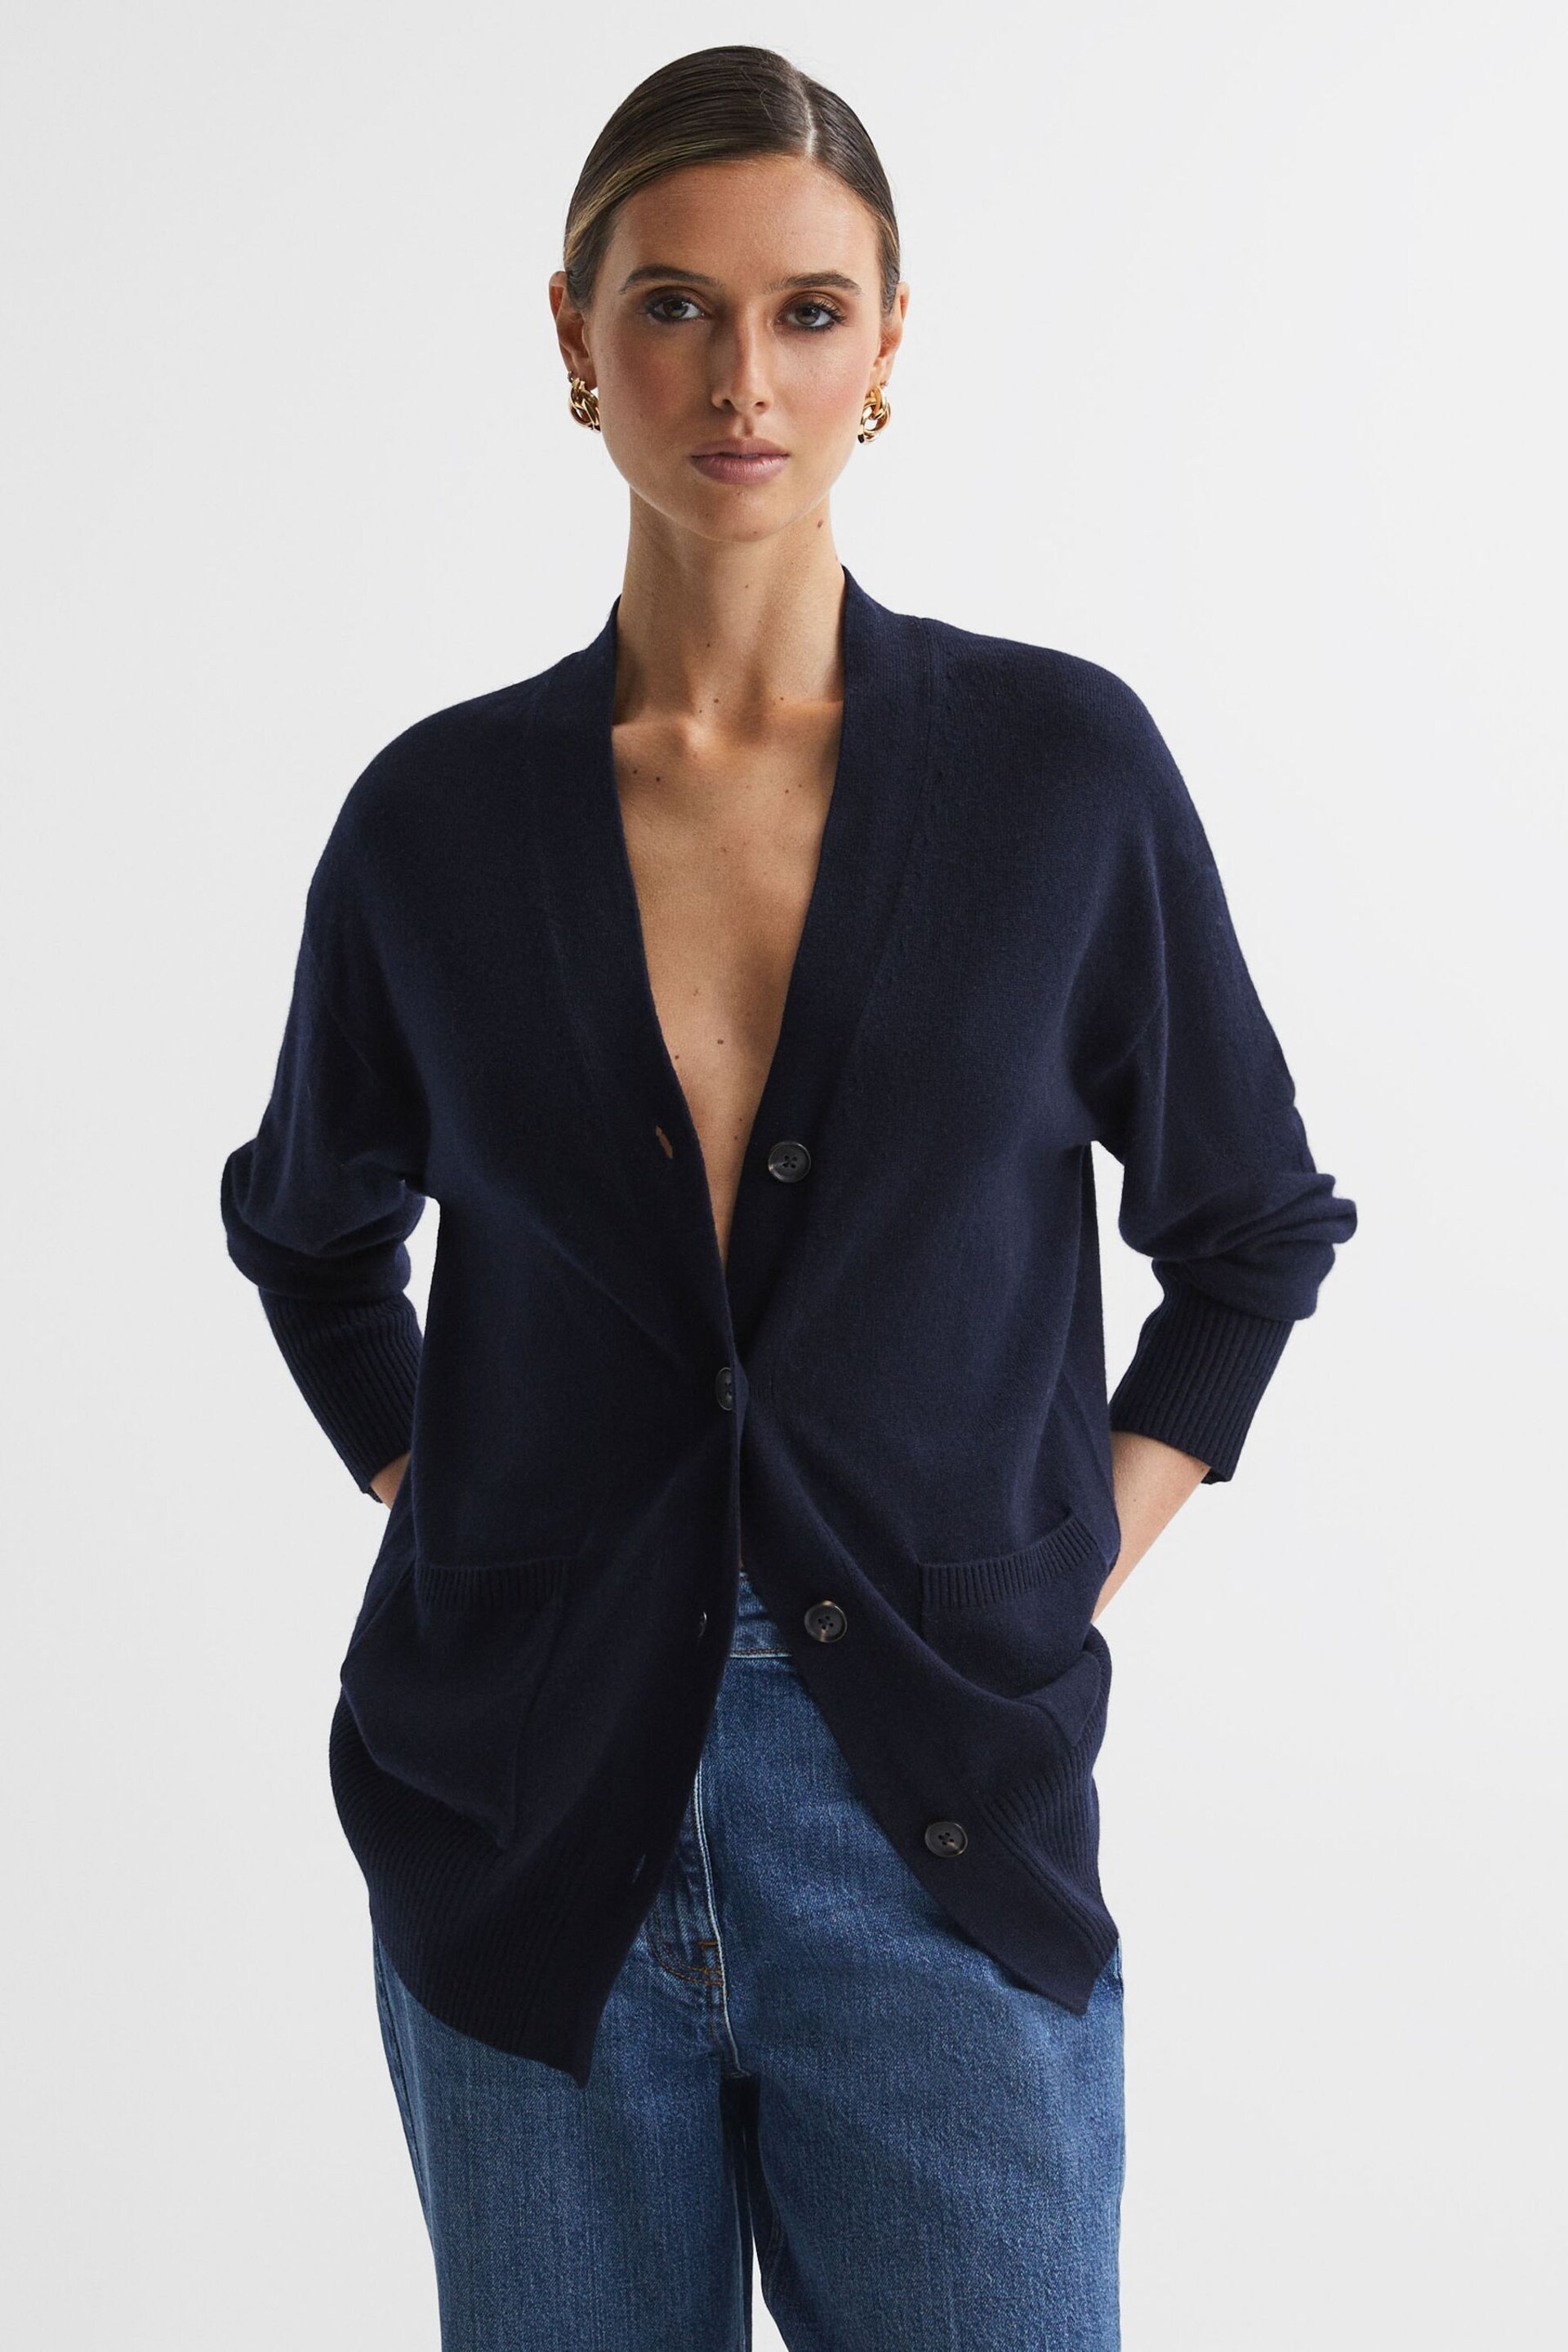 Reiss Navy Carly Wool Blend Button-Through Cardigan - Image 1 of 5